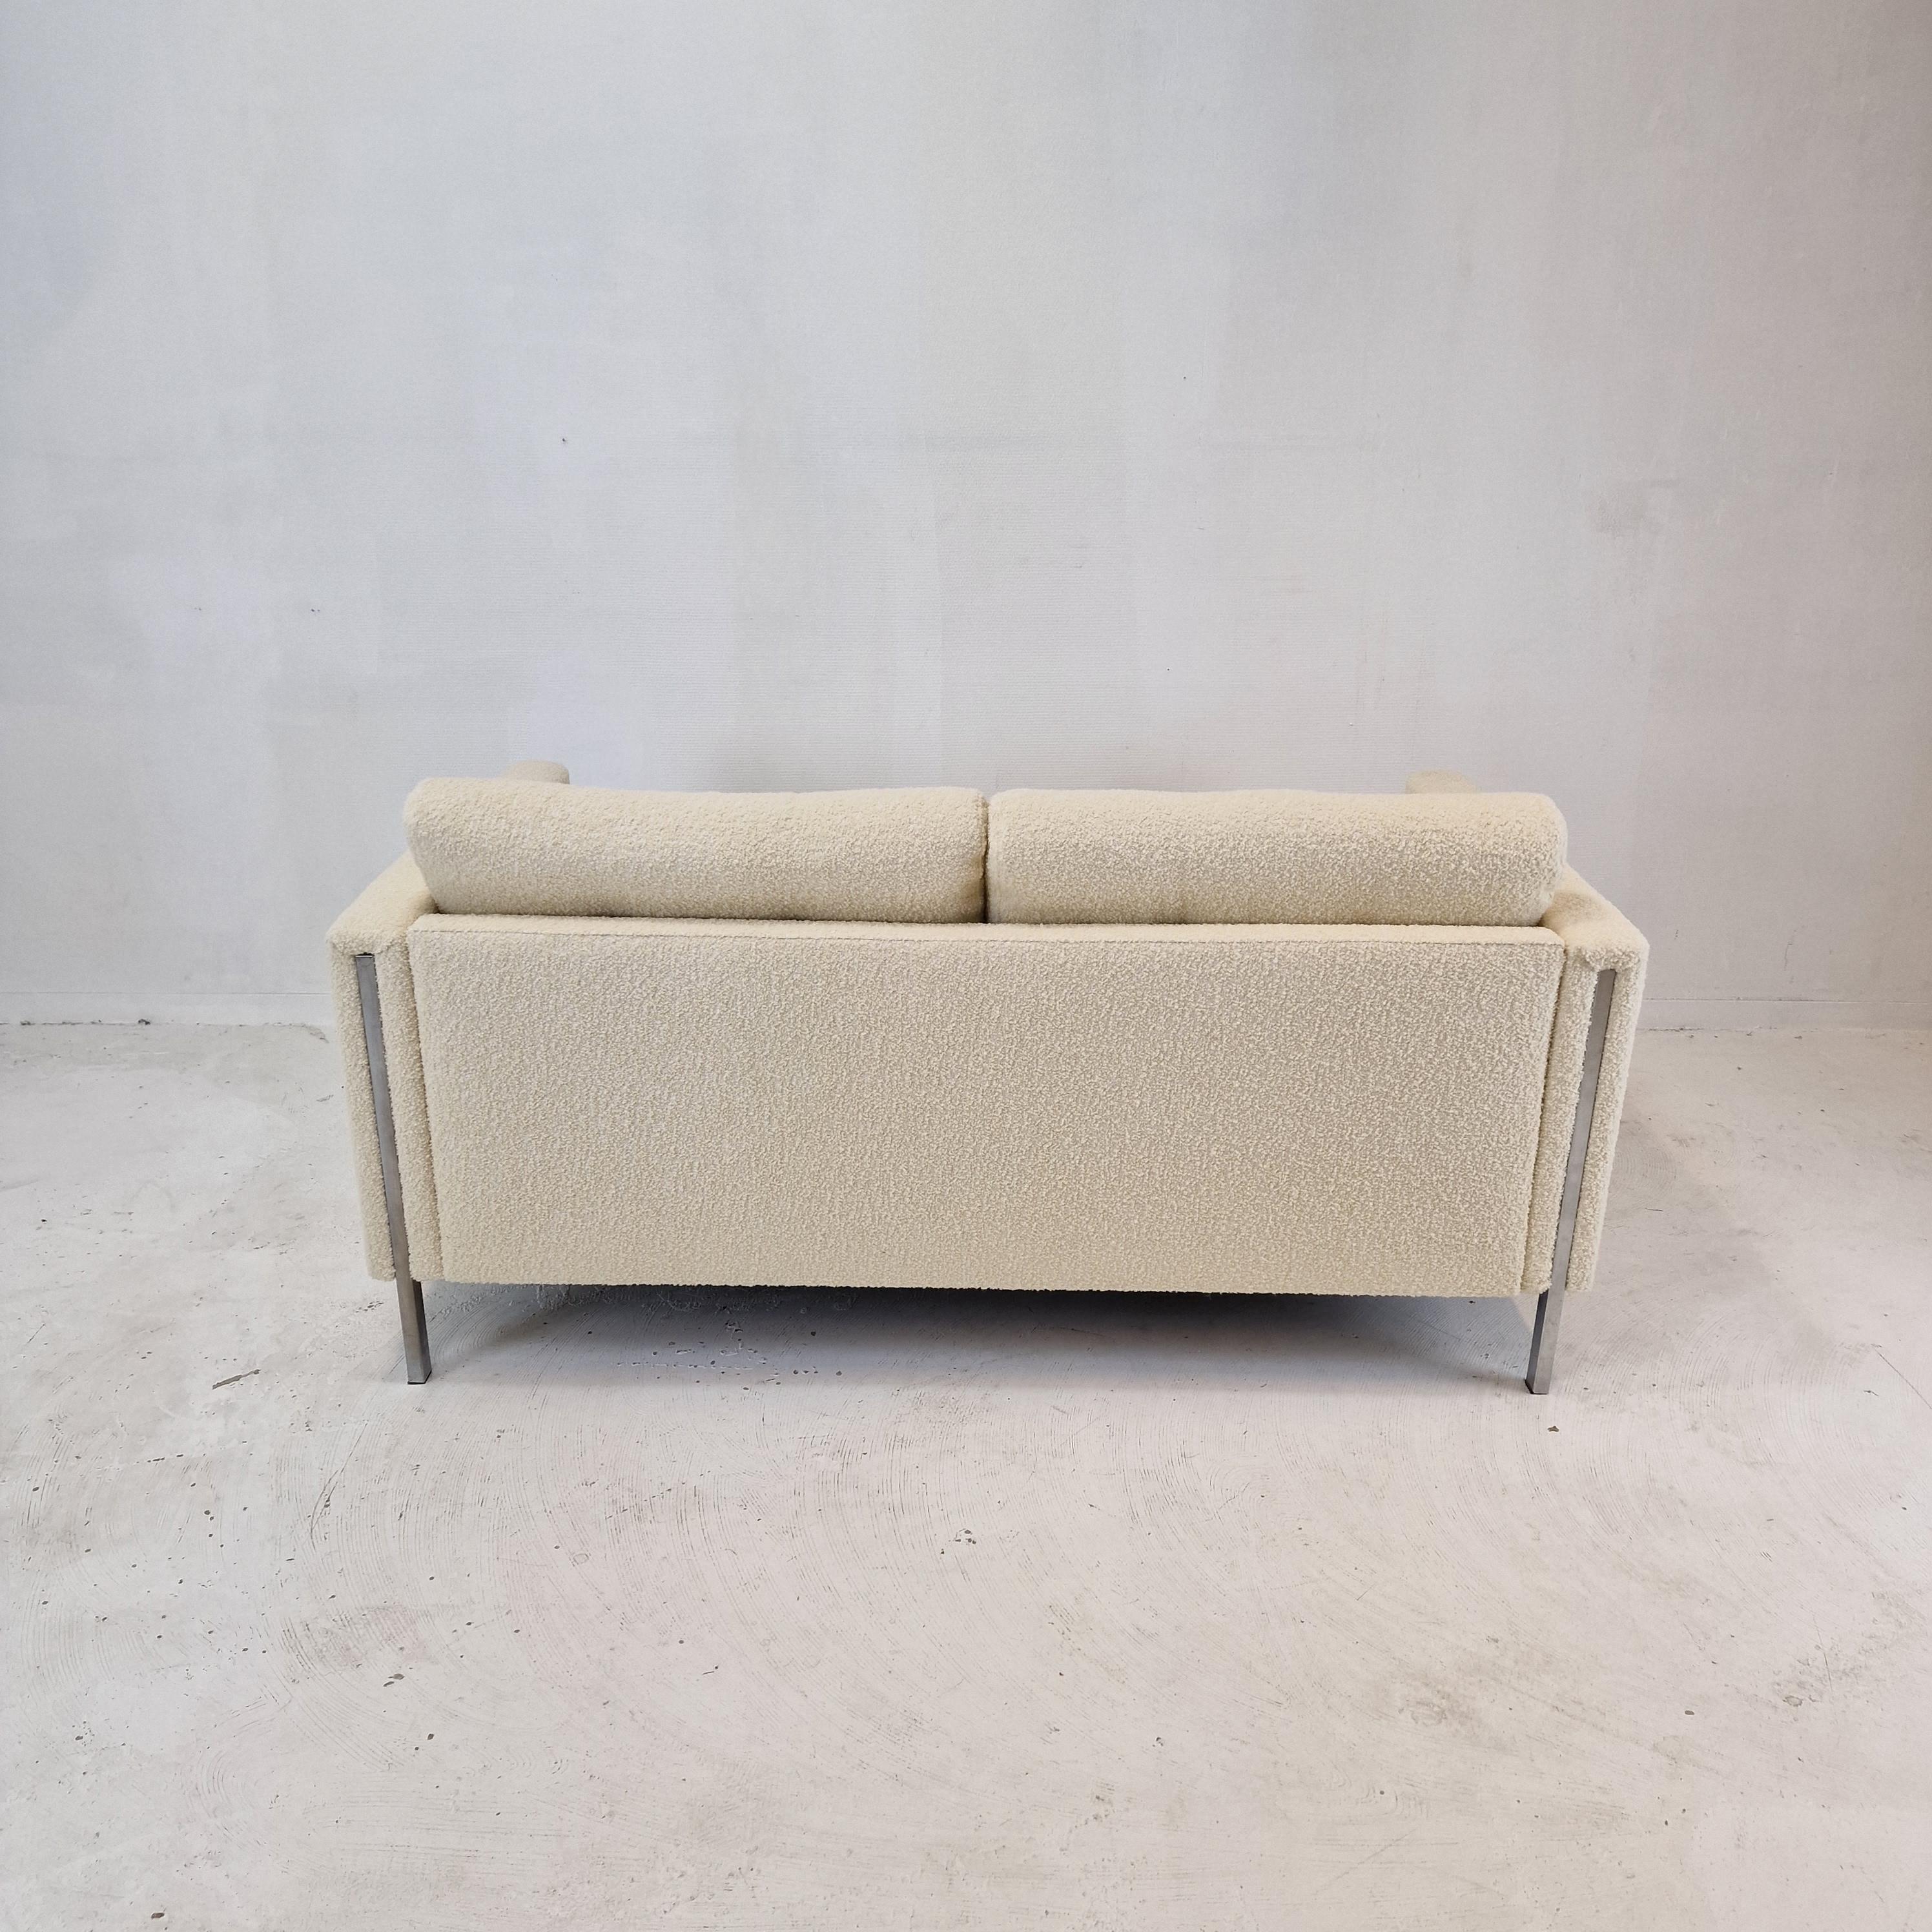 Midcentury 2-Seat Model 442 Sofa by Pierre Paulin for Artifort, 1960s For Sale 6